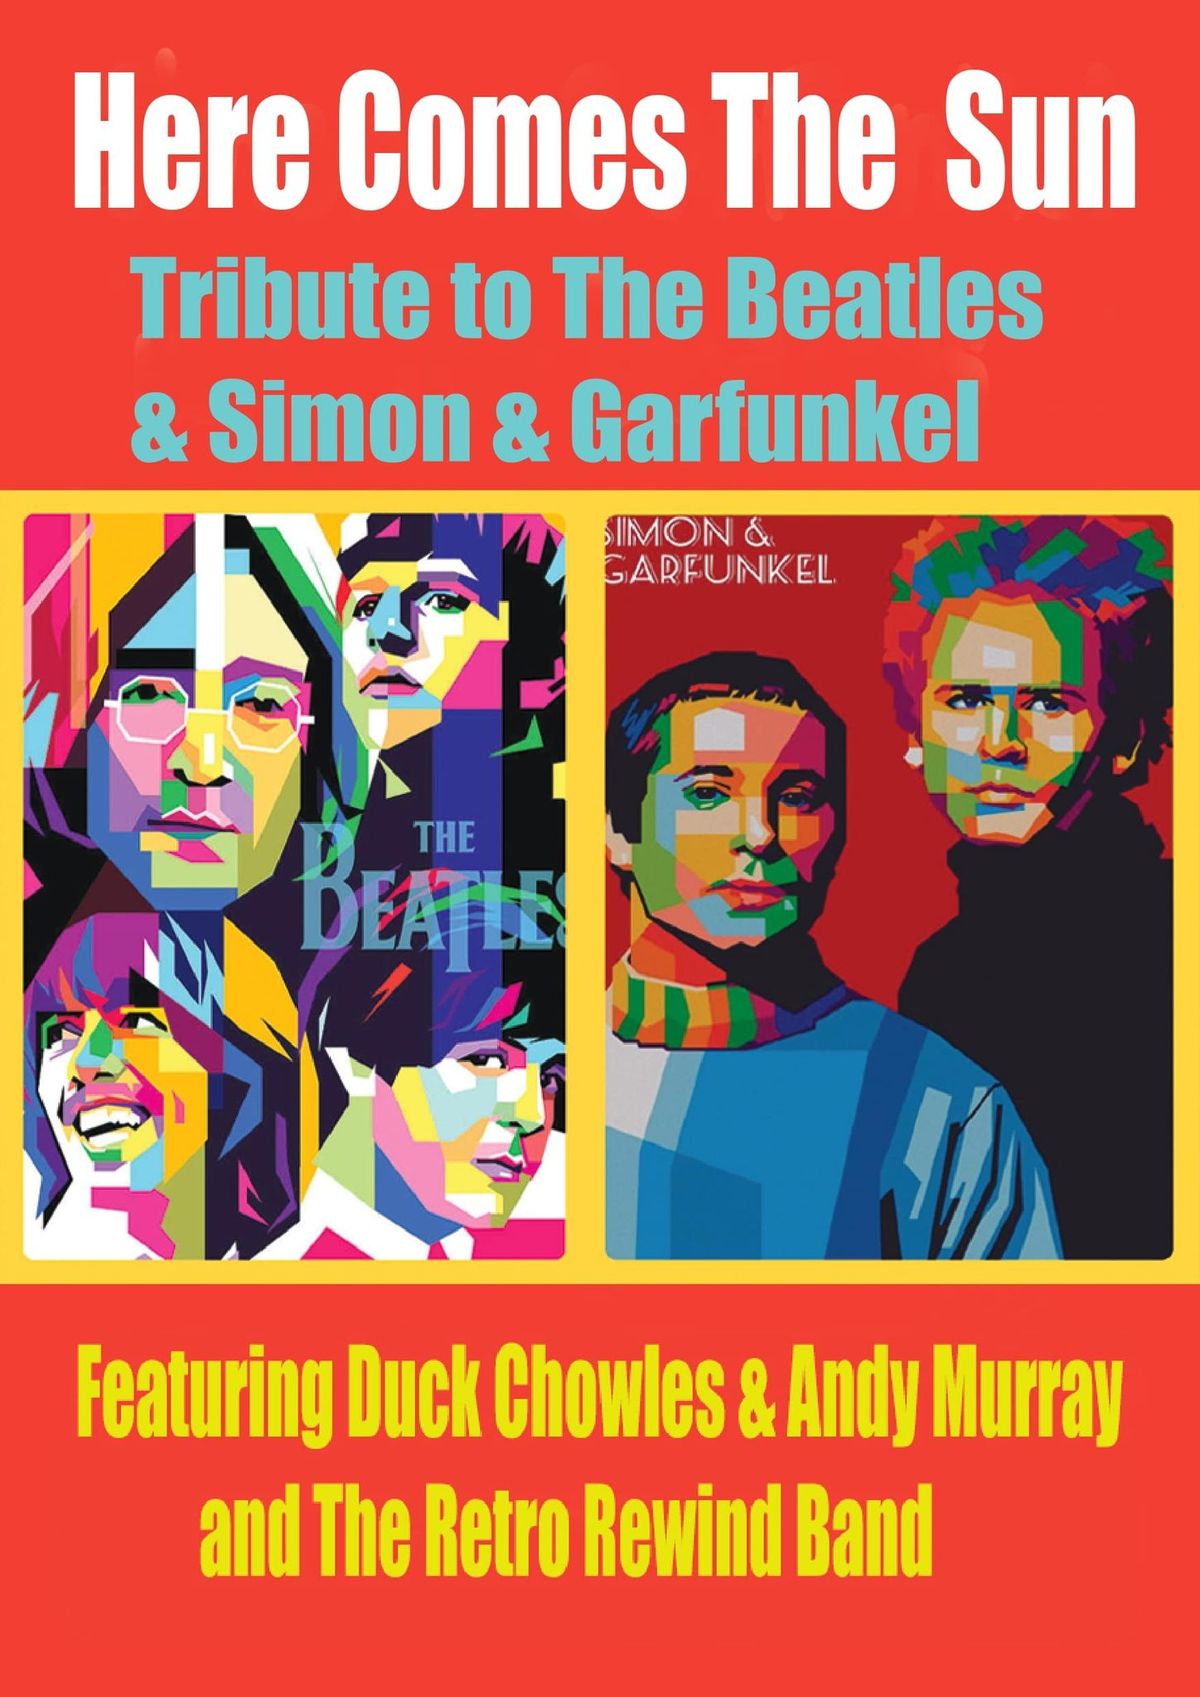 Here Comes The Sun - A Tribute to The Beatles and Simon & Garfunkel